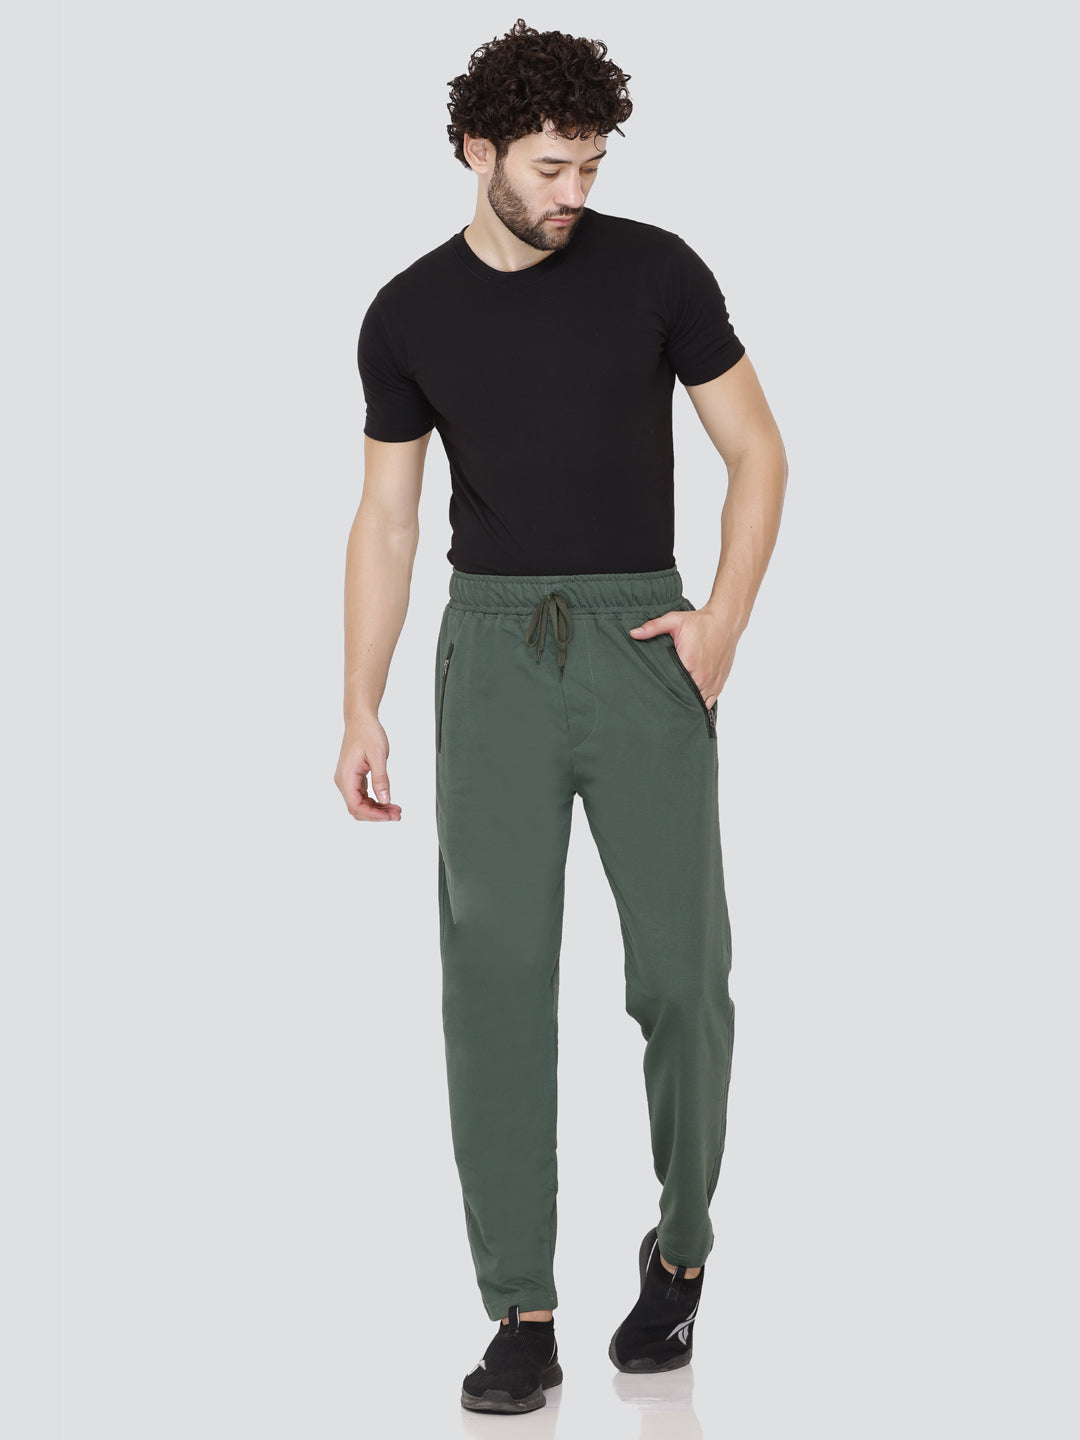 Stylish Cotton Jinxer Pants With Zipper Pockets For Men (Pack Of 2 Combo) At Best Prices Online In India